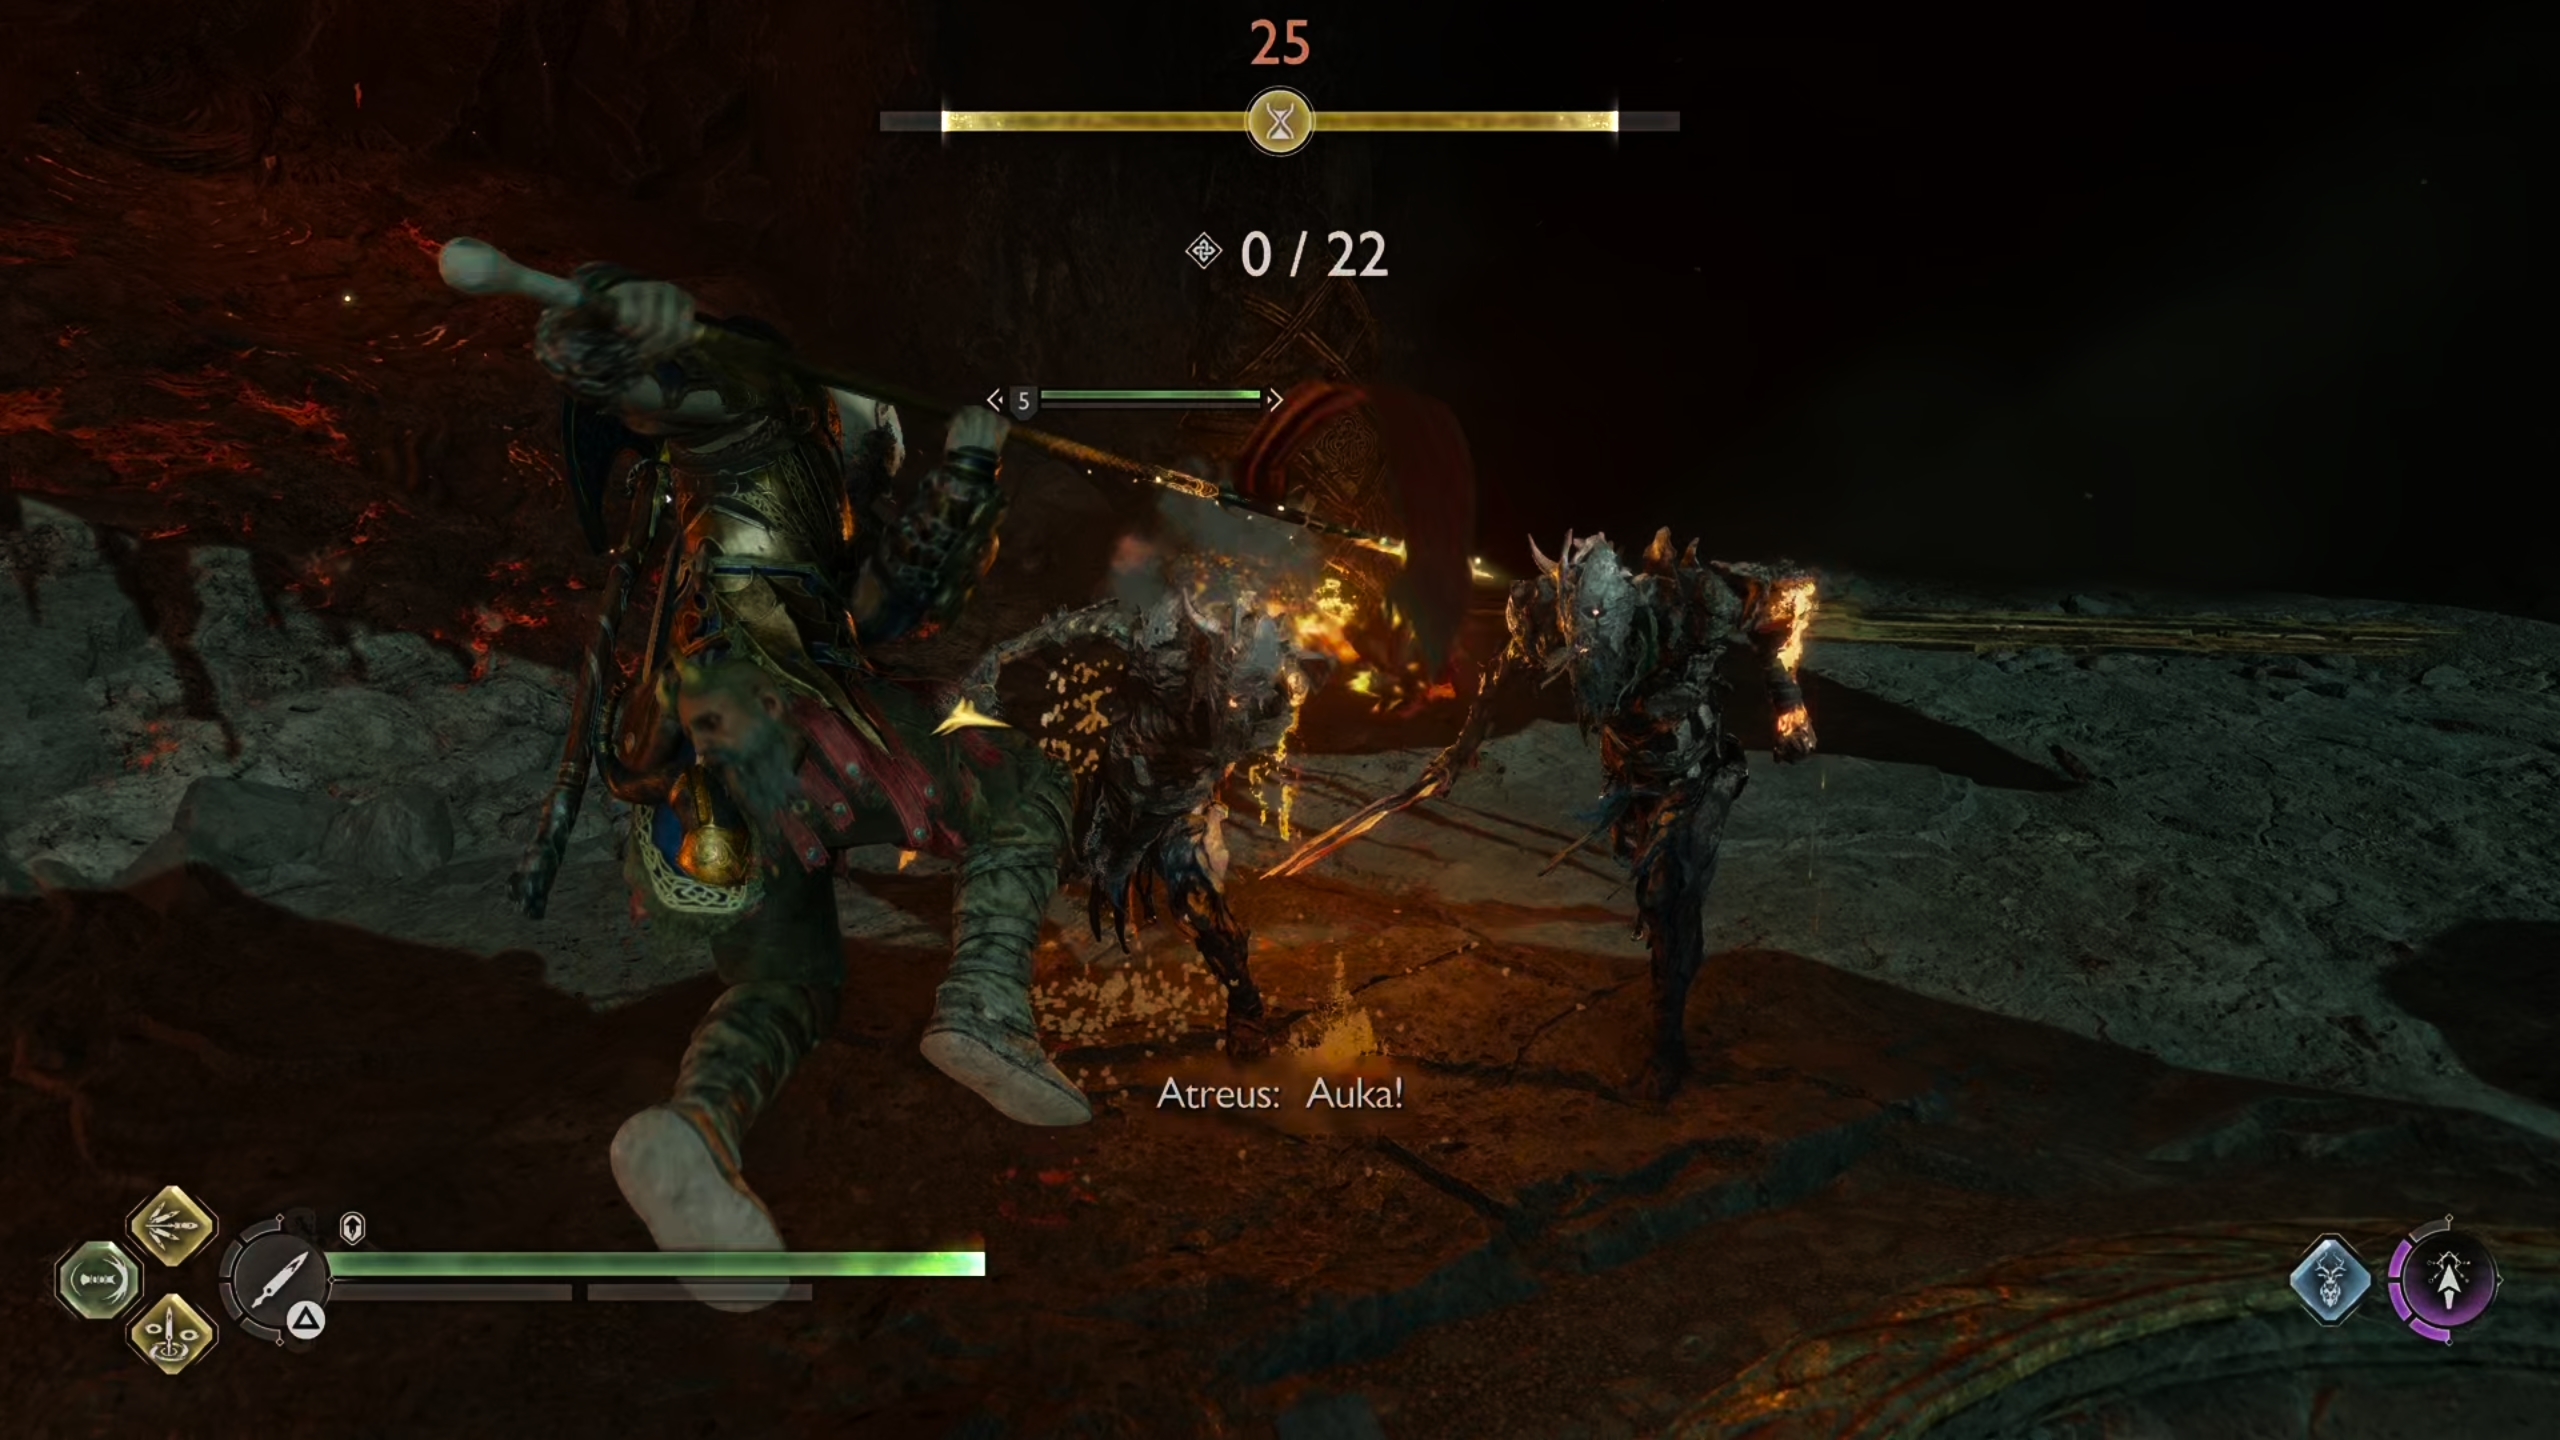 The trial will start off with a number of weaker enemies such as Draugr.